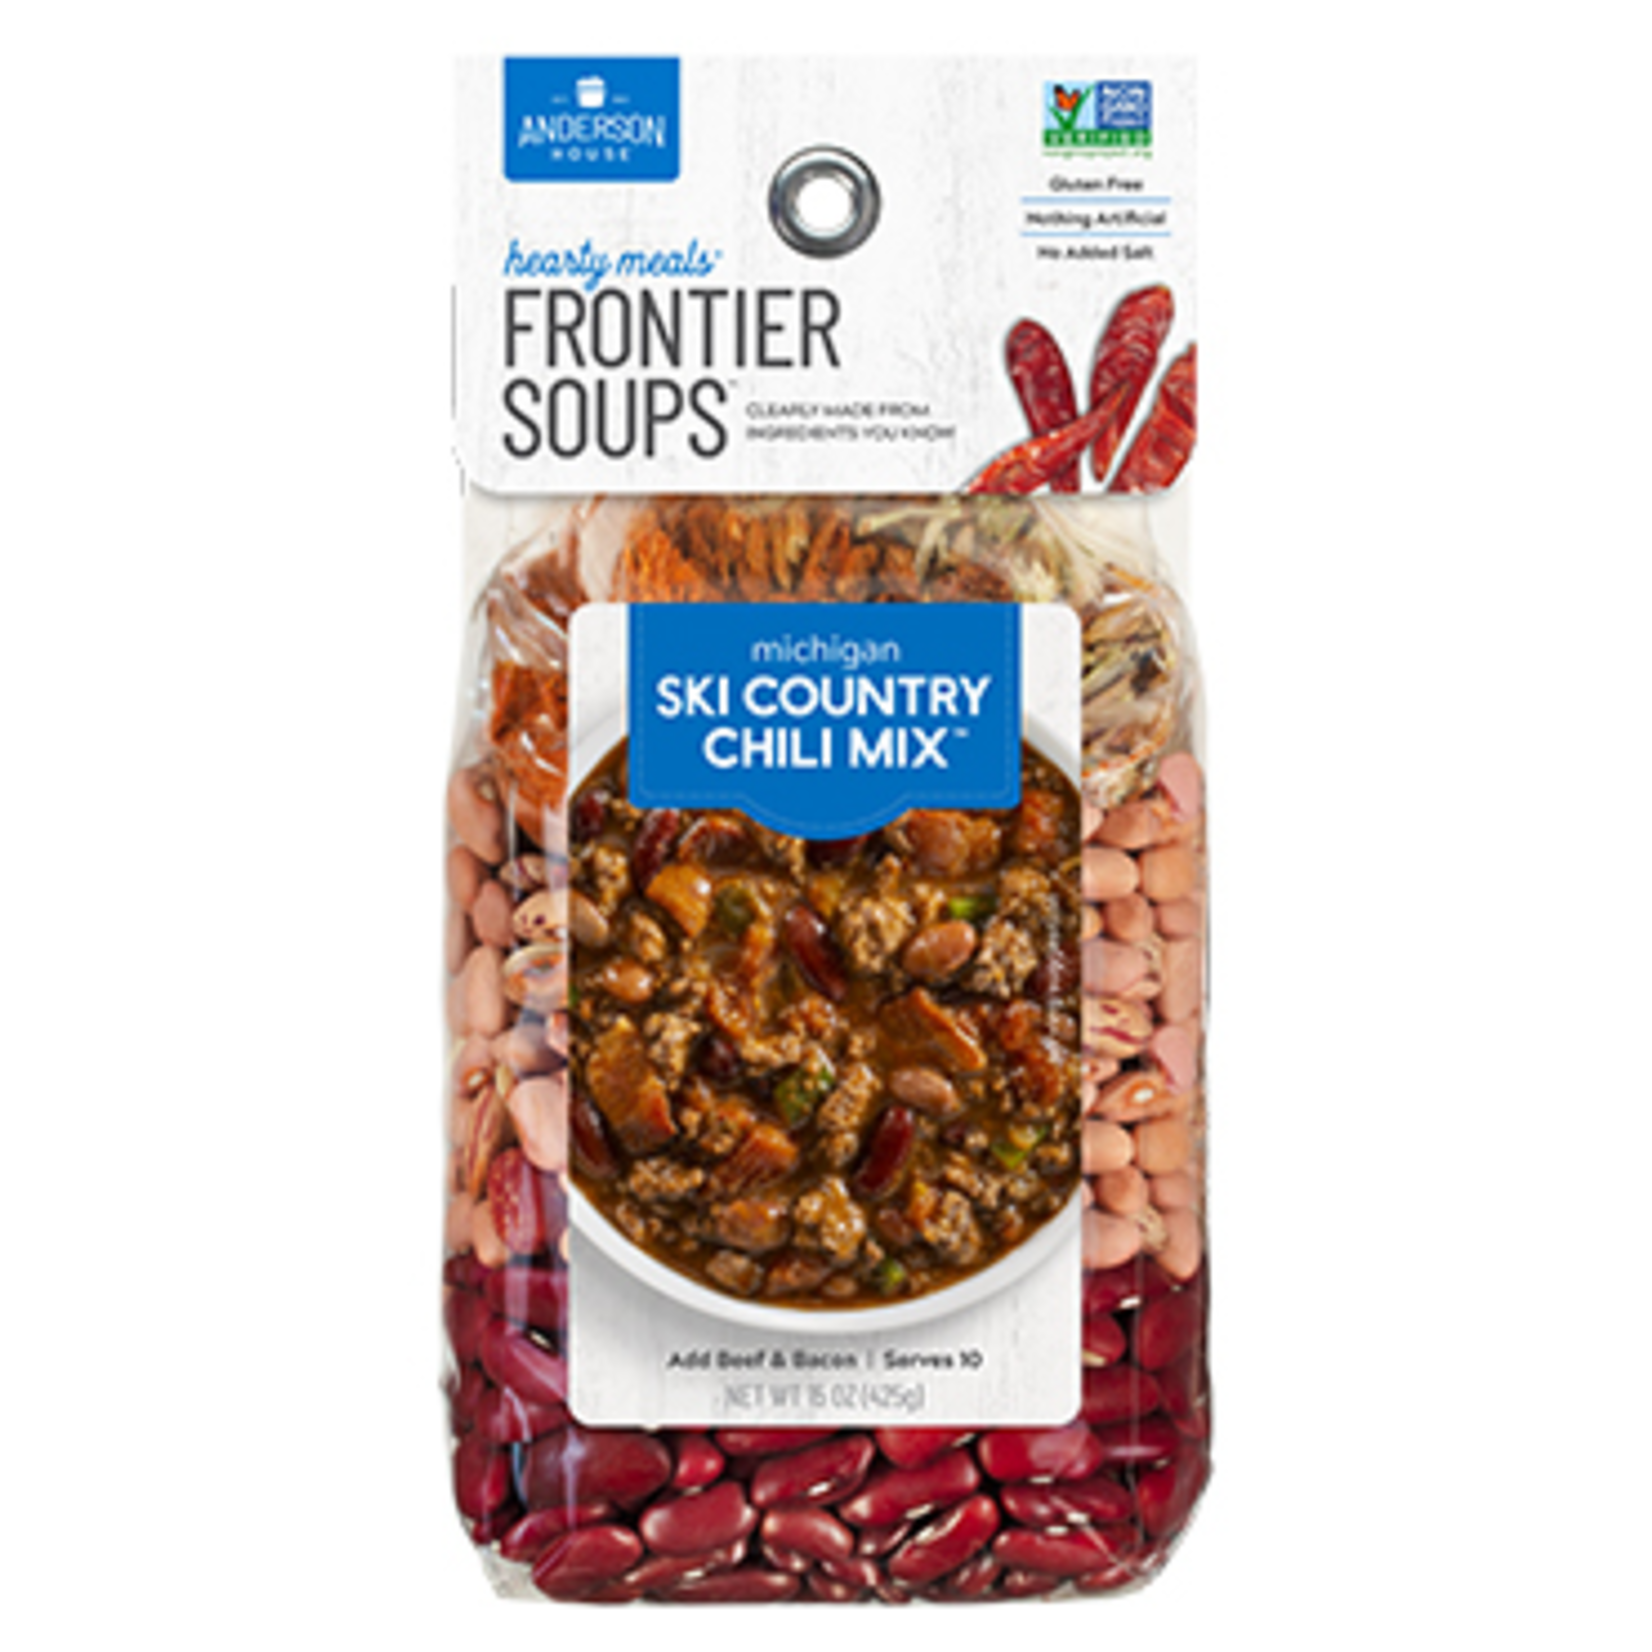 Frontier Soups Michigan Ski Country Chili Soup Mix